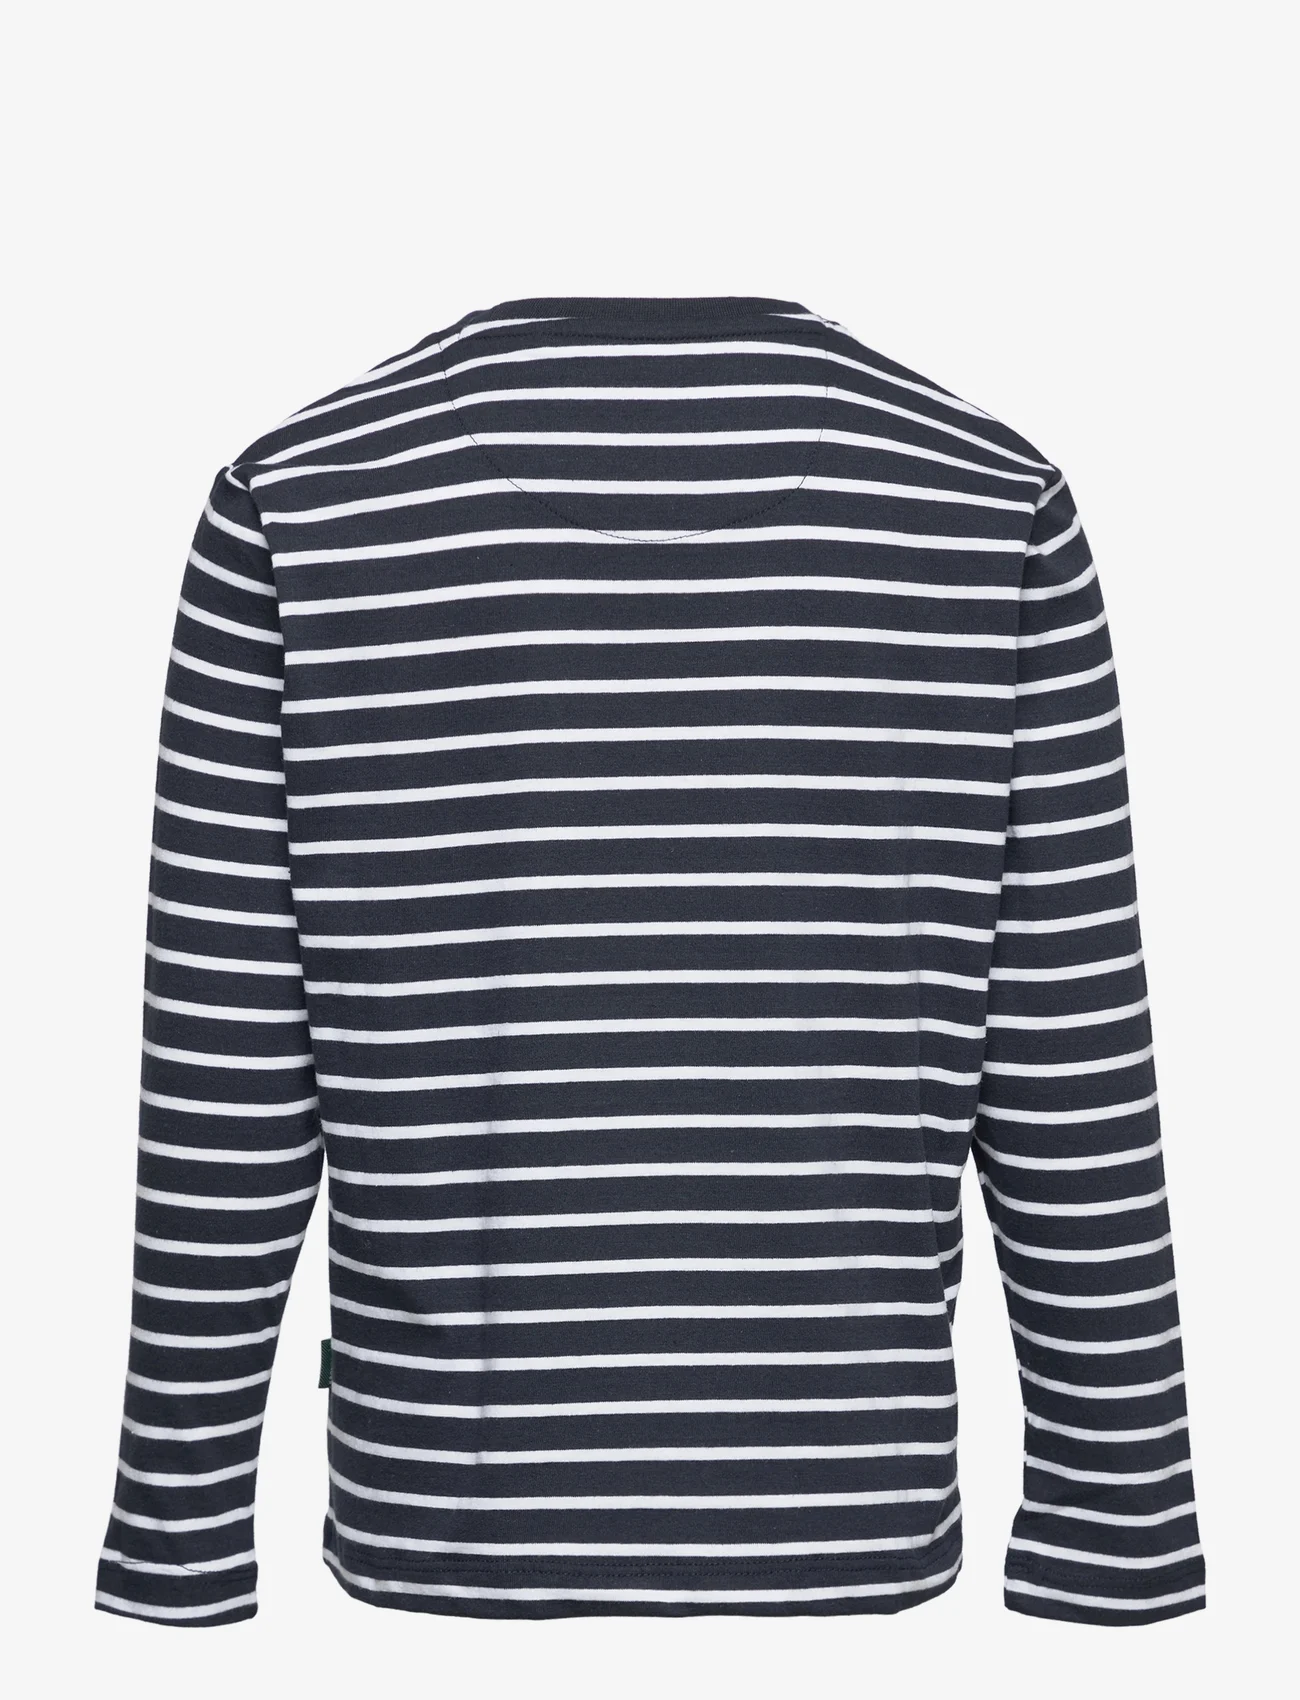 Kronstadt - Timmi Kids Organic/Recycled L/S stripe tee - long-sleeved - navy / white - 1